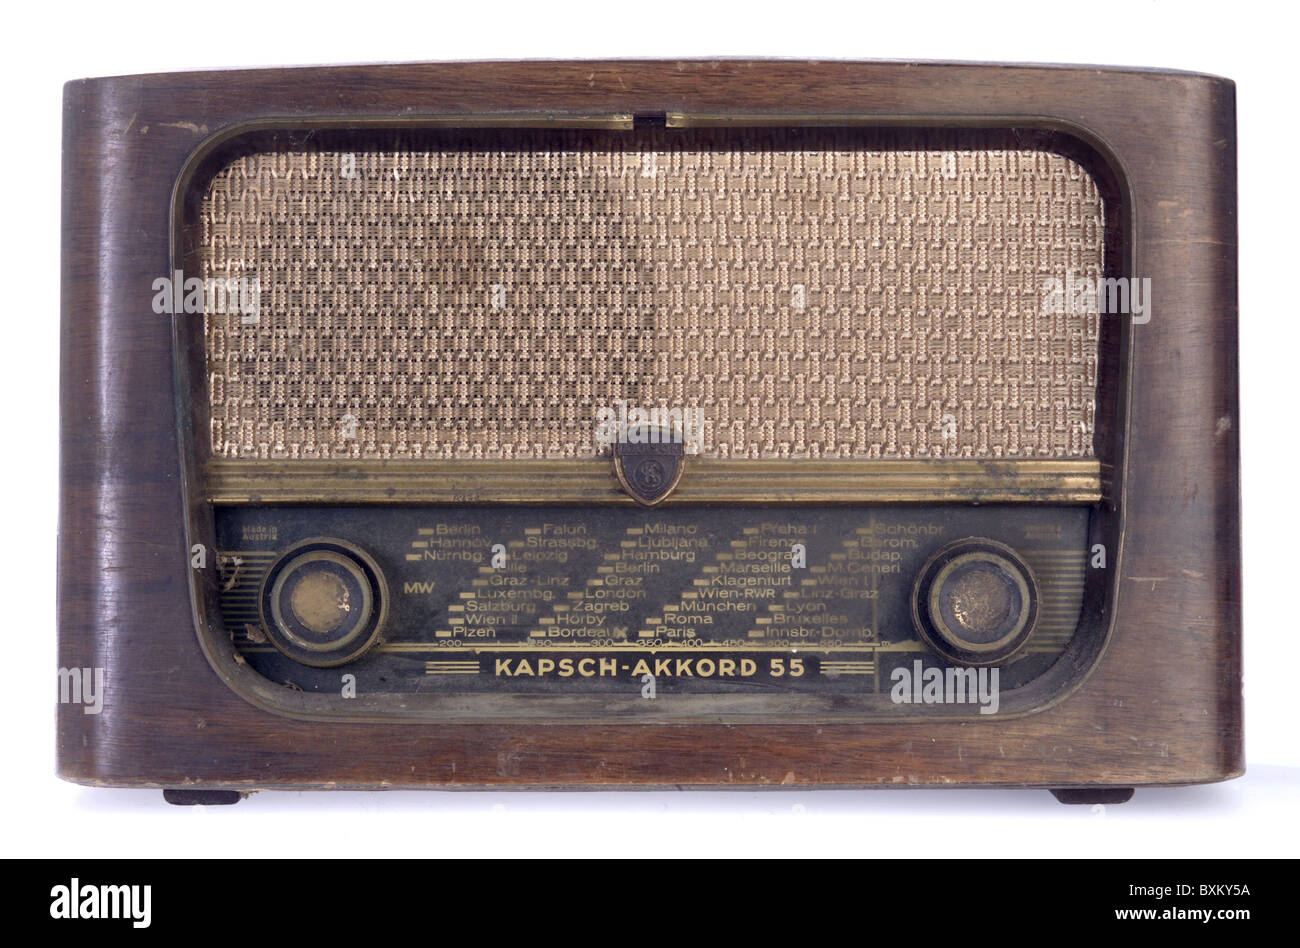 broadcast, radio set, Kapsch Akkord 55, Austria, 1954, dirty, defect, e-waste, electronic, technics, Austrian, design, Gelsenkirchen Baroque, front panel, 1950s, 50s, 20th century, historic, historical, clipping, cut out, cut-out, cut-outs, nostalgia, Additional-Rights-Clearences-Not Available Stock Photo